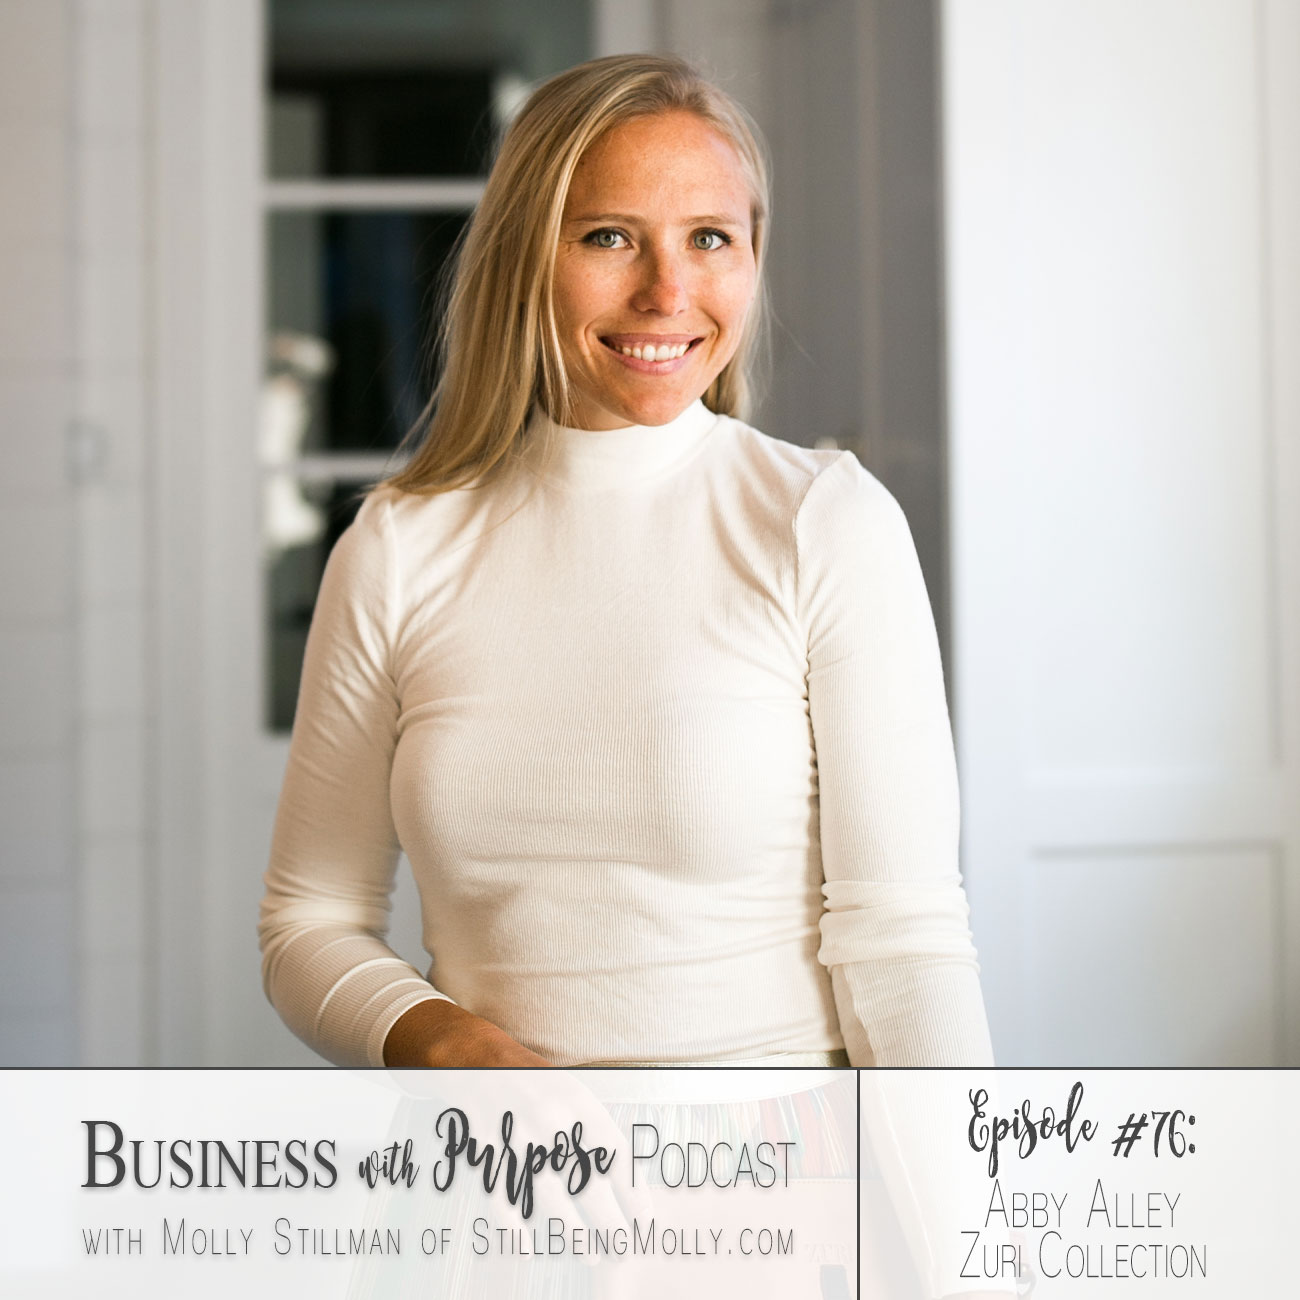 Business with Purpose Podcast EP 76: Abby Alley, Founder of Zuri Collection by popular North Carolina ethical blogger and podcaster Still Being Molly